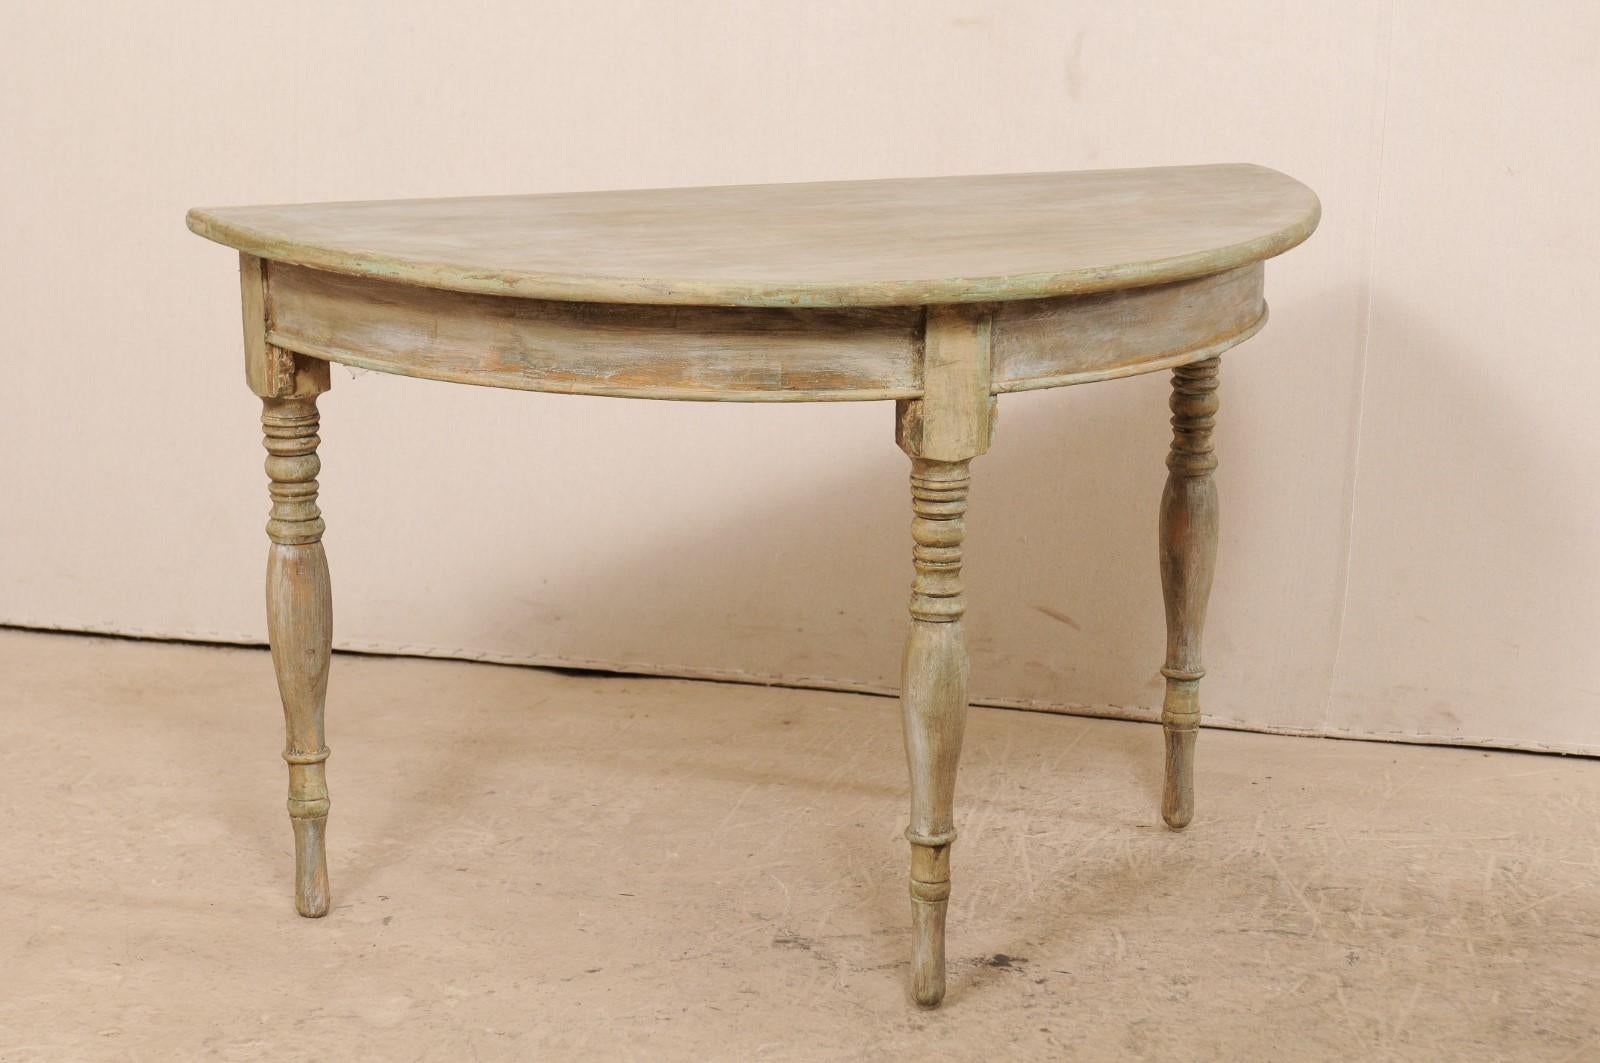 Pair of 19th Century Swedish Painted Wood Demilune Tables 2